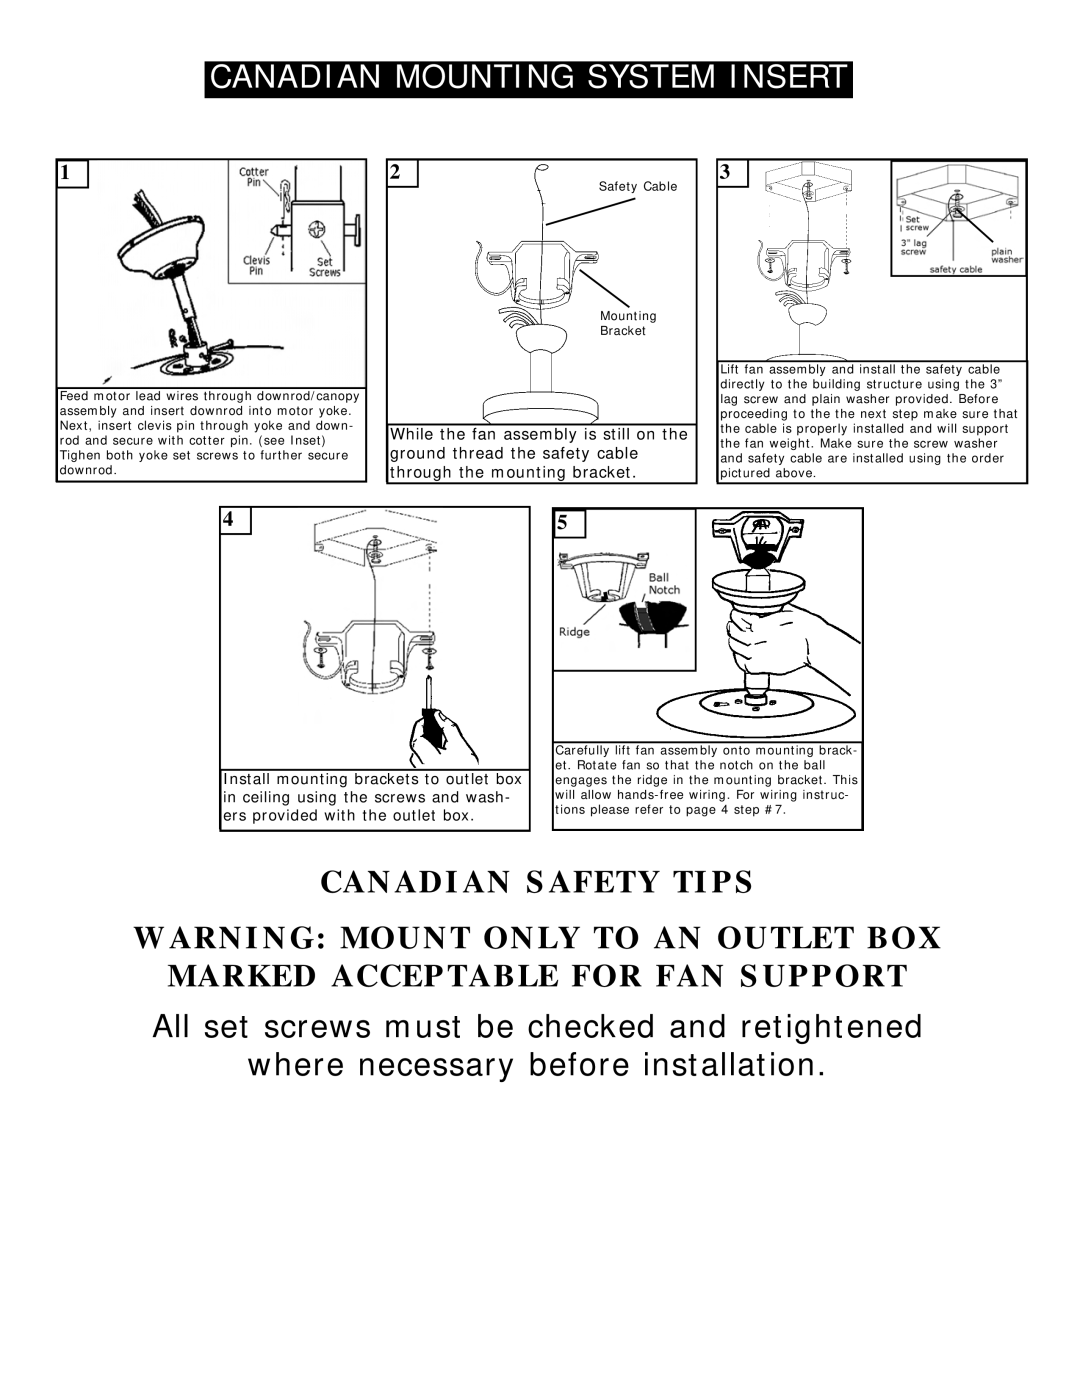 Monte Carlo Fan Company 5PR52 Canadian Safety Tips, While the fan assembly is still on the, ground thread the safety cable 